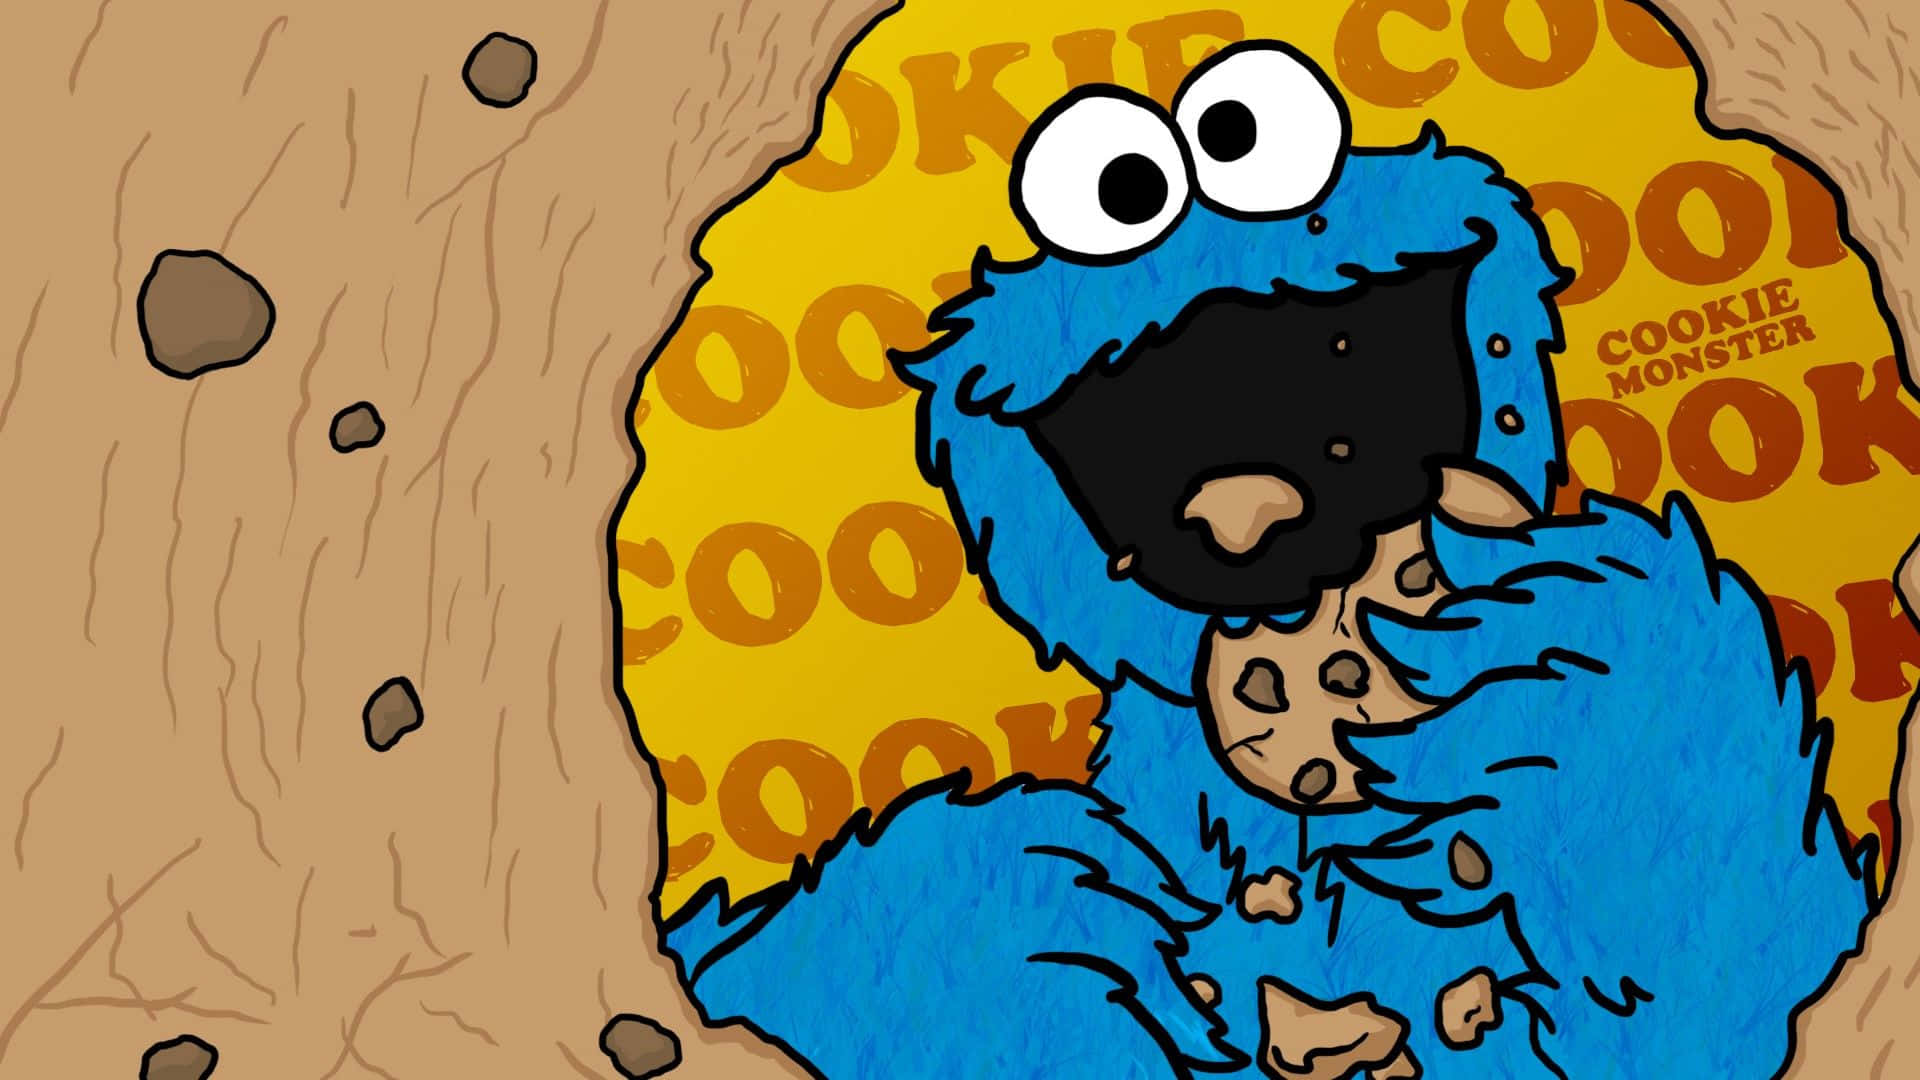 The Cookie Monster enjoying a delicious feast of cookies on a blue background.